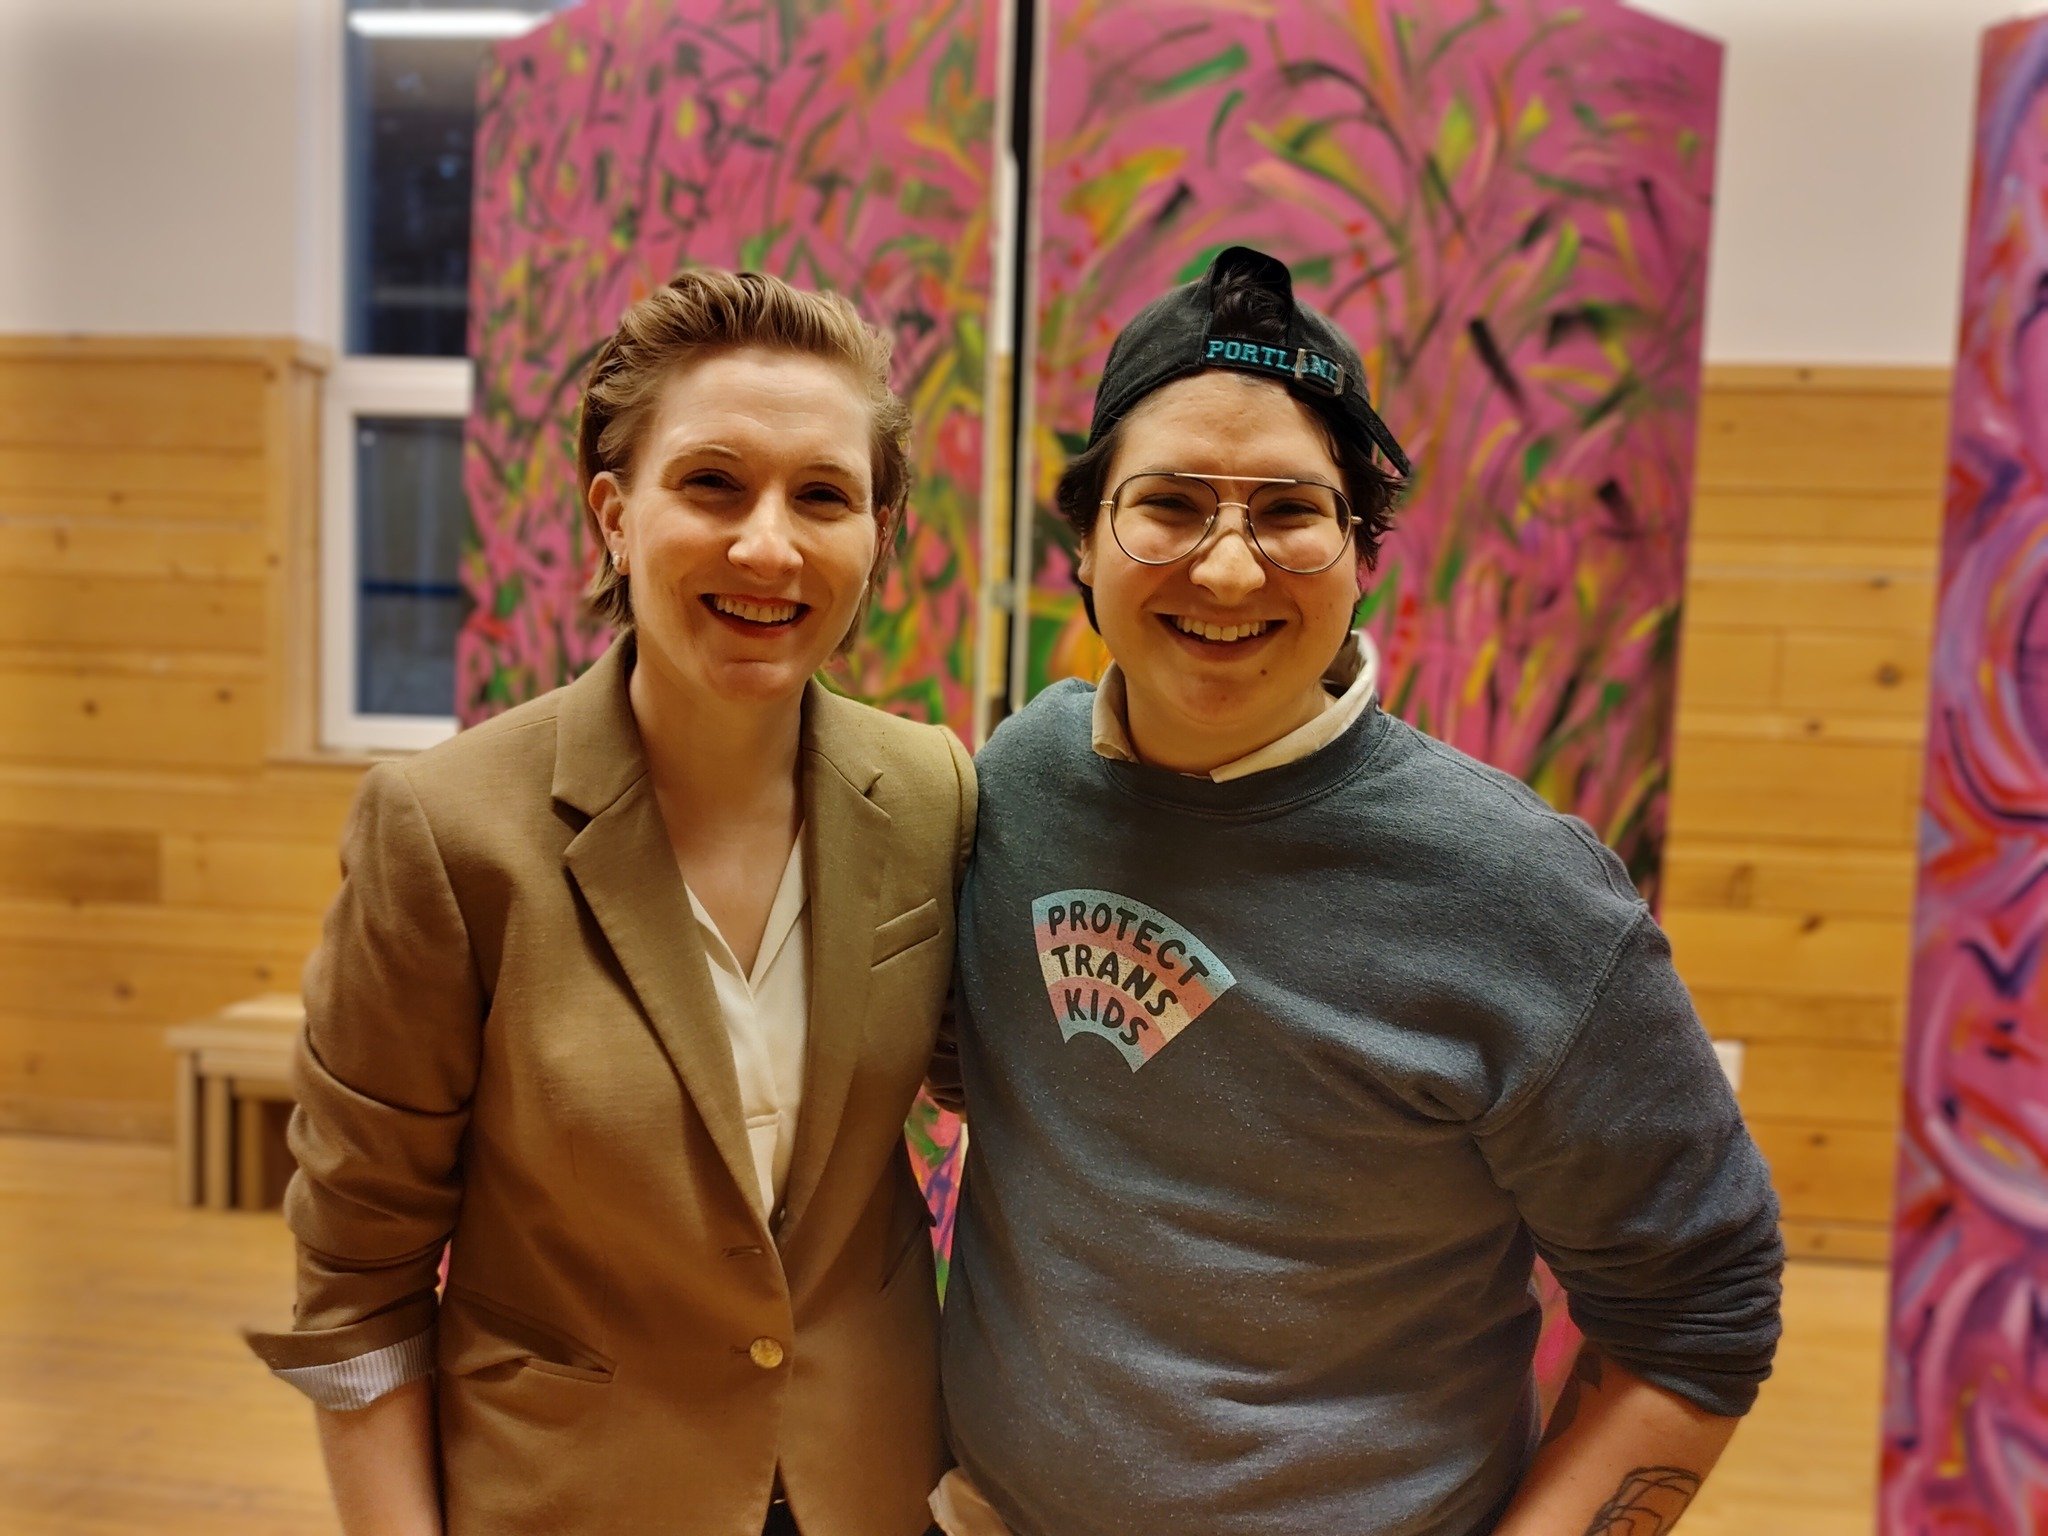 A big shoutout to Lindz Amer and Brigid Black for a great evening presentation at our Parenting for Peace event last night.  If you haven't checked out Lindz' newest kids' book, you can head to the @childrensmuseum_theatreofmaine this weekend!